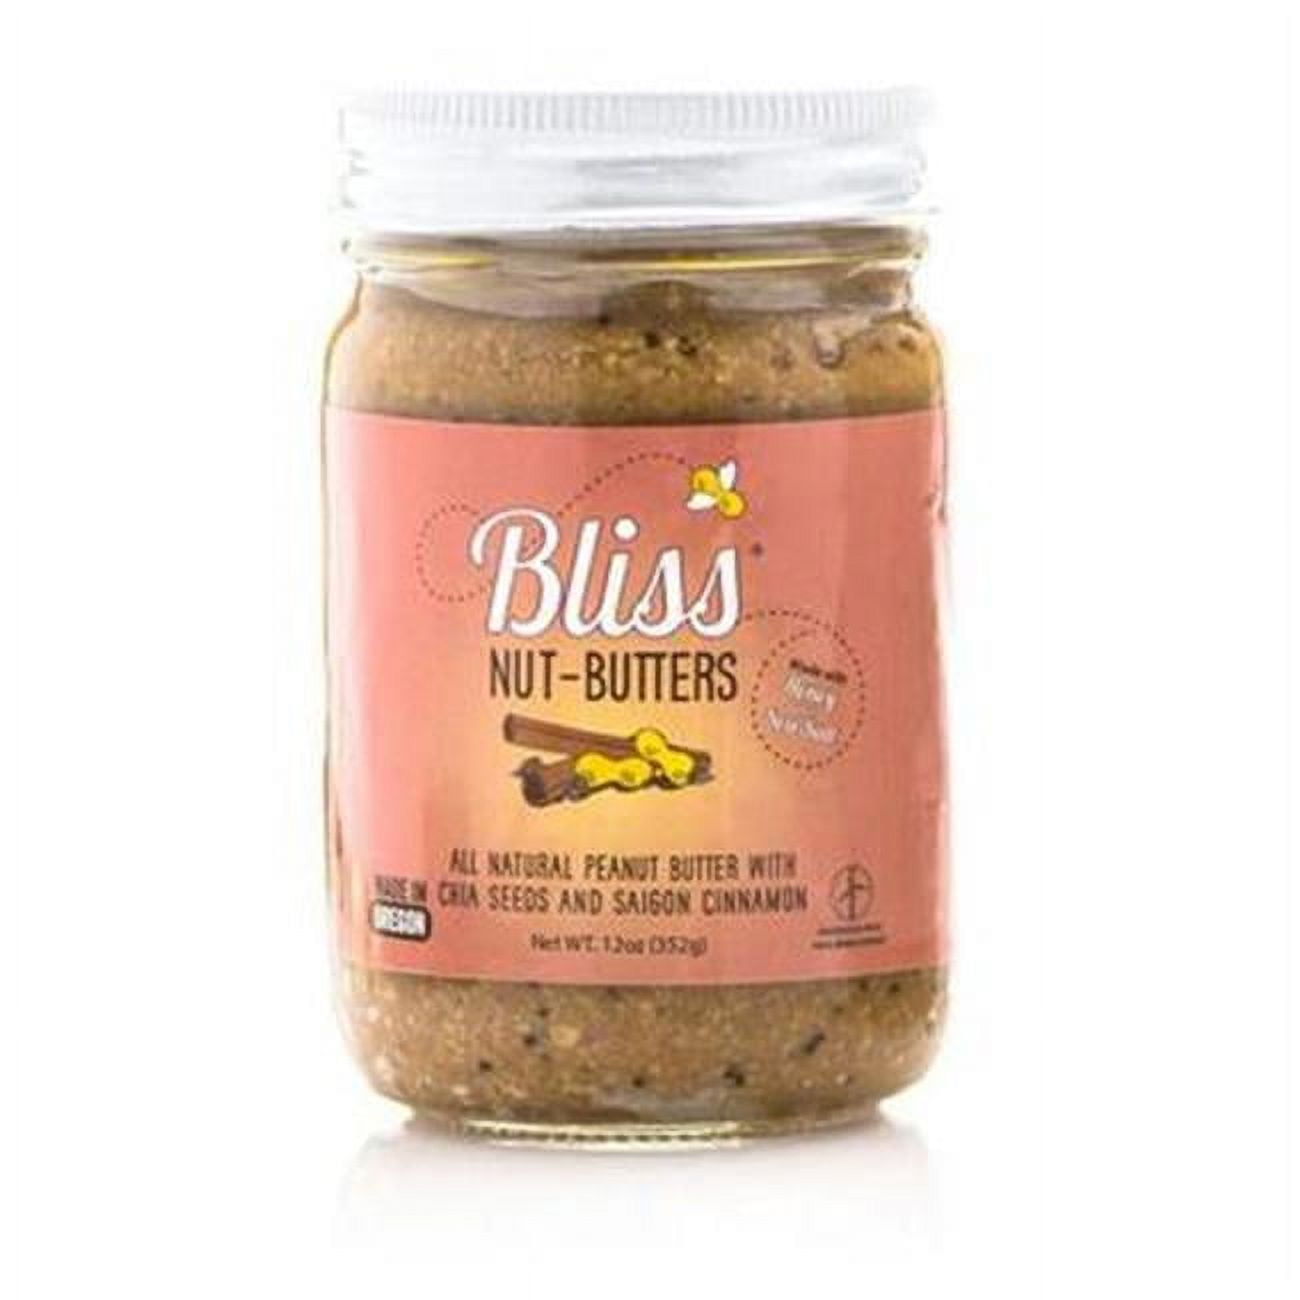 Picture of Bliss Nut Butters BWA85453 6 x 12 oz Cinnamon Chia Seed Peanut Butter